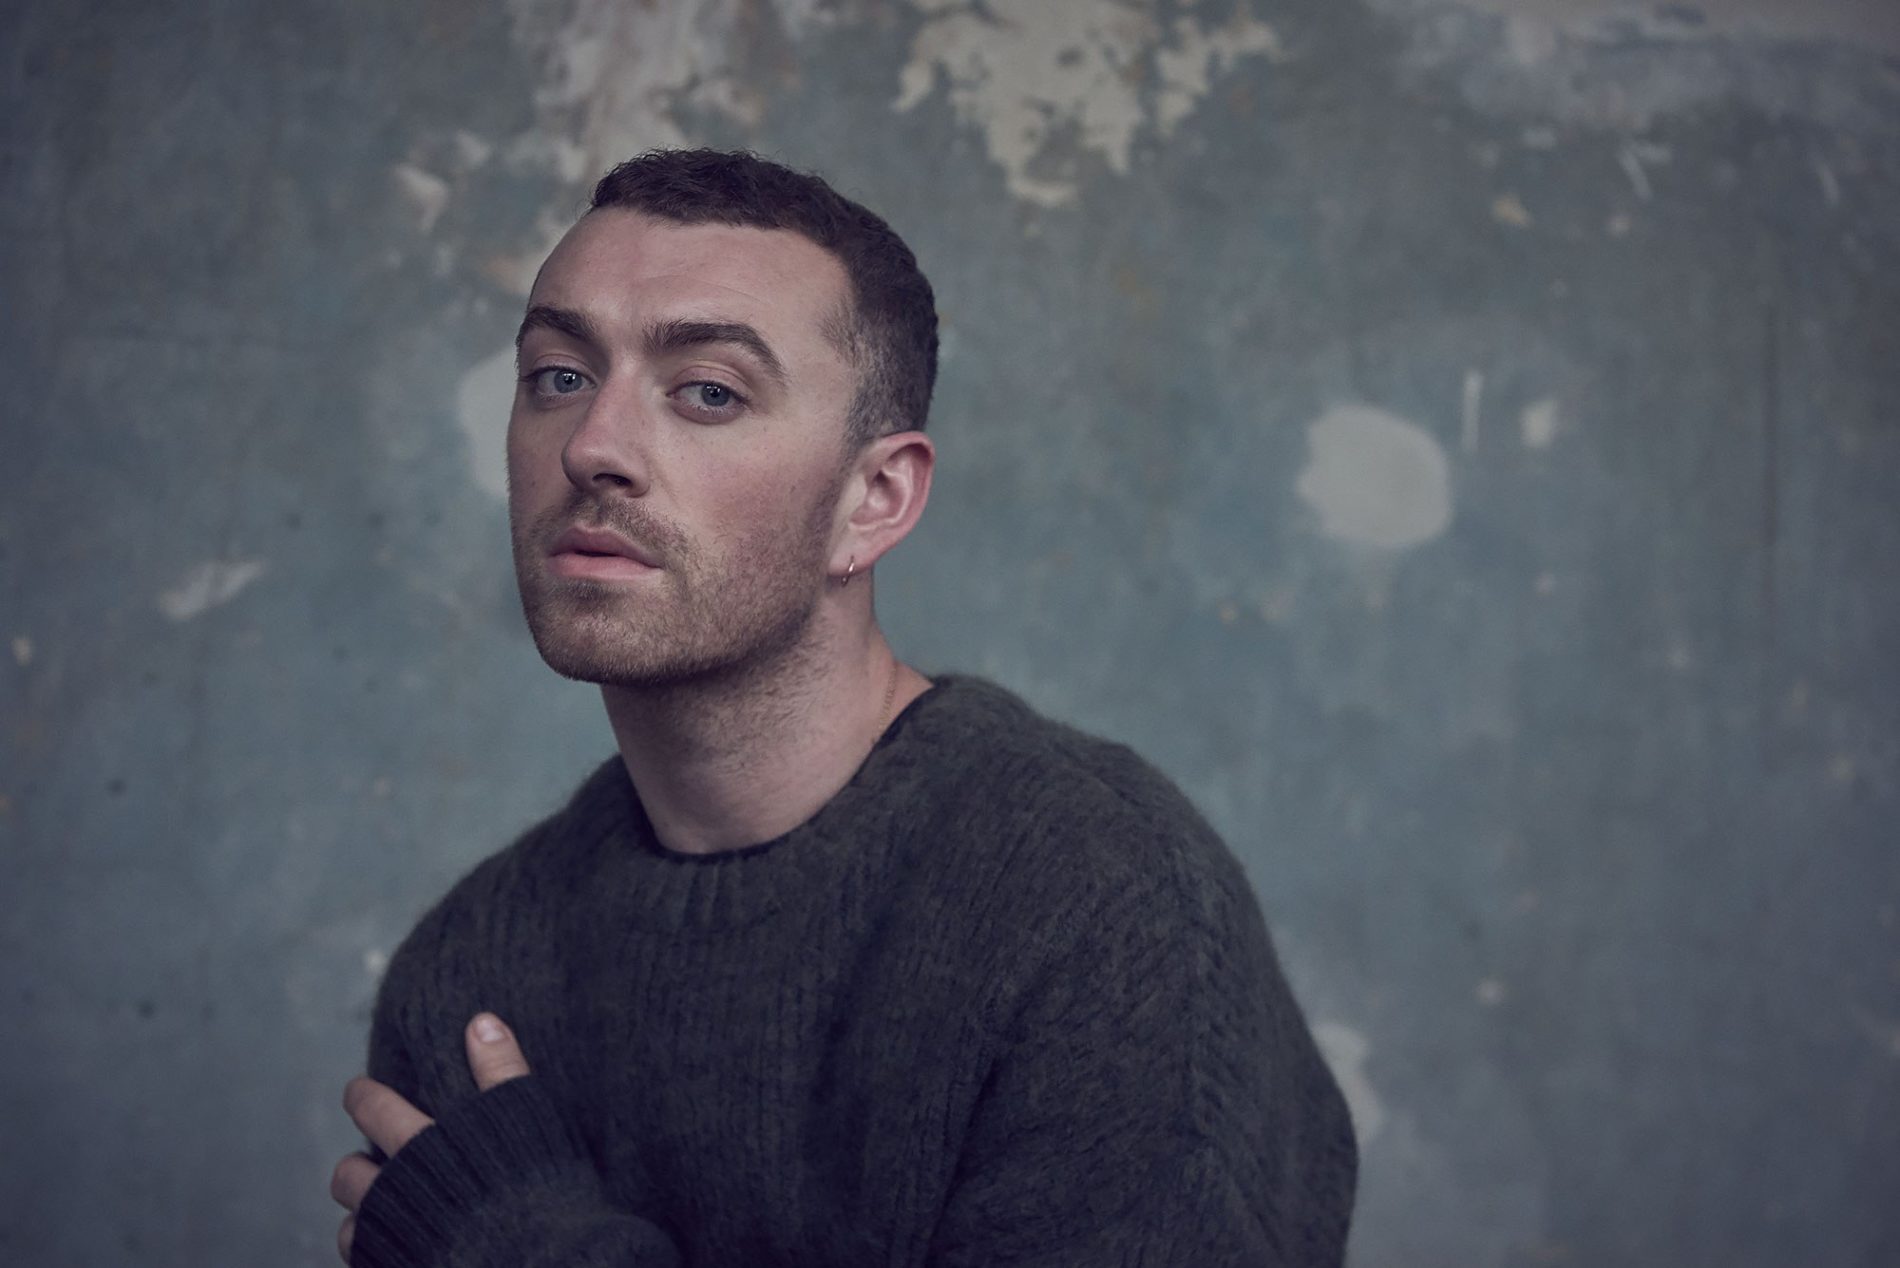 Sam Smith on his gender identity: “I feel just as much woman as I am man.”